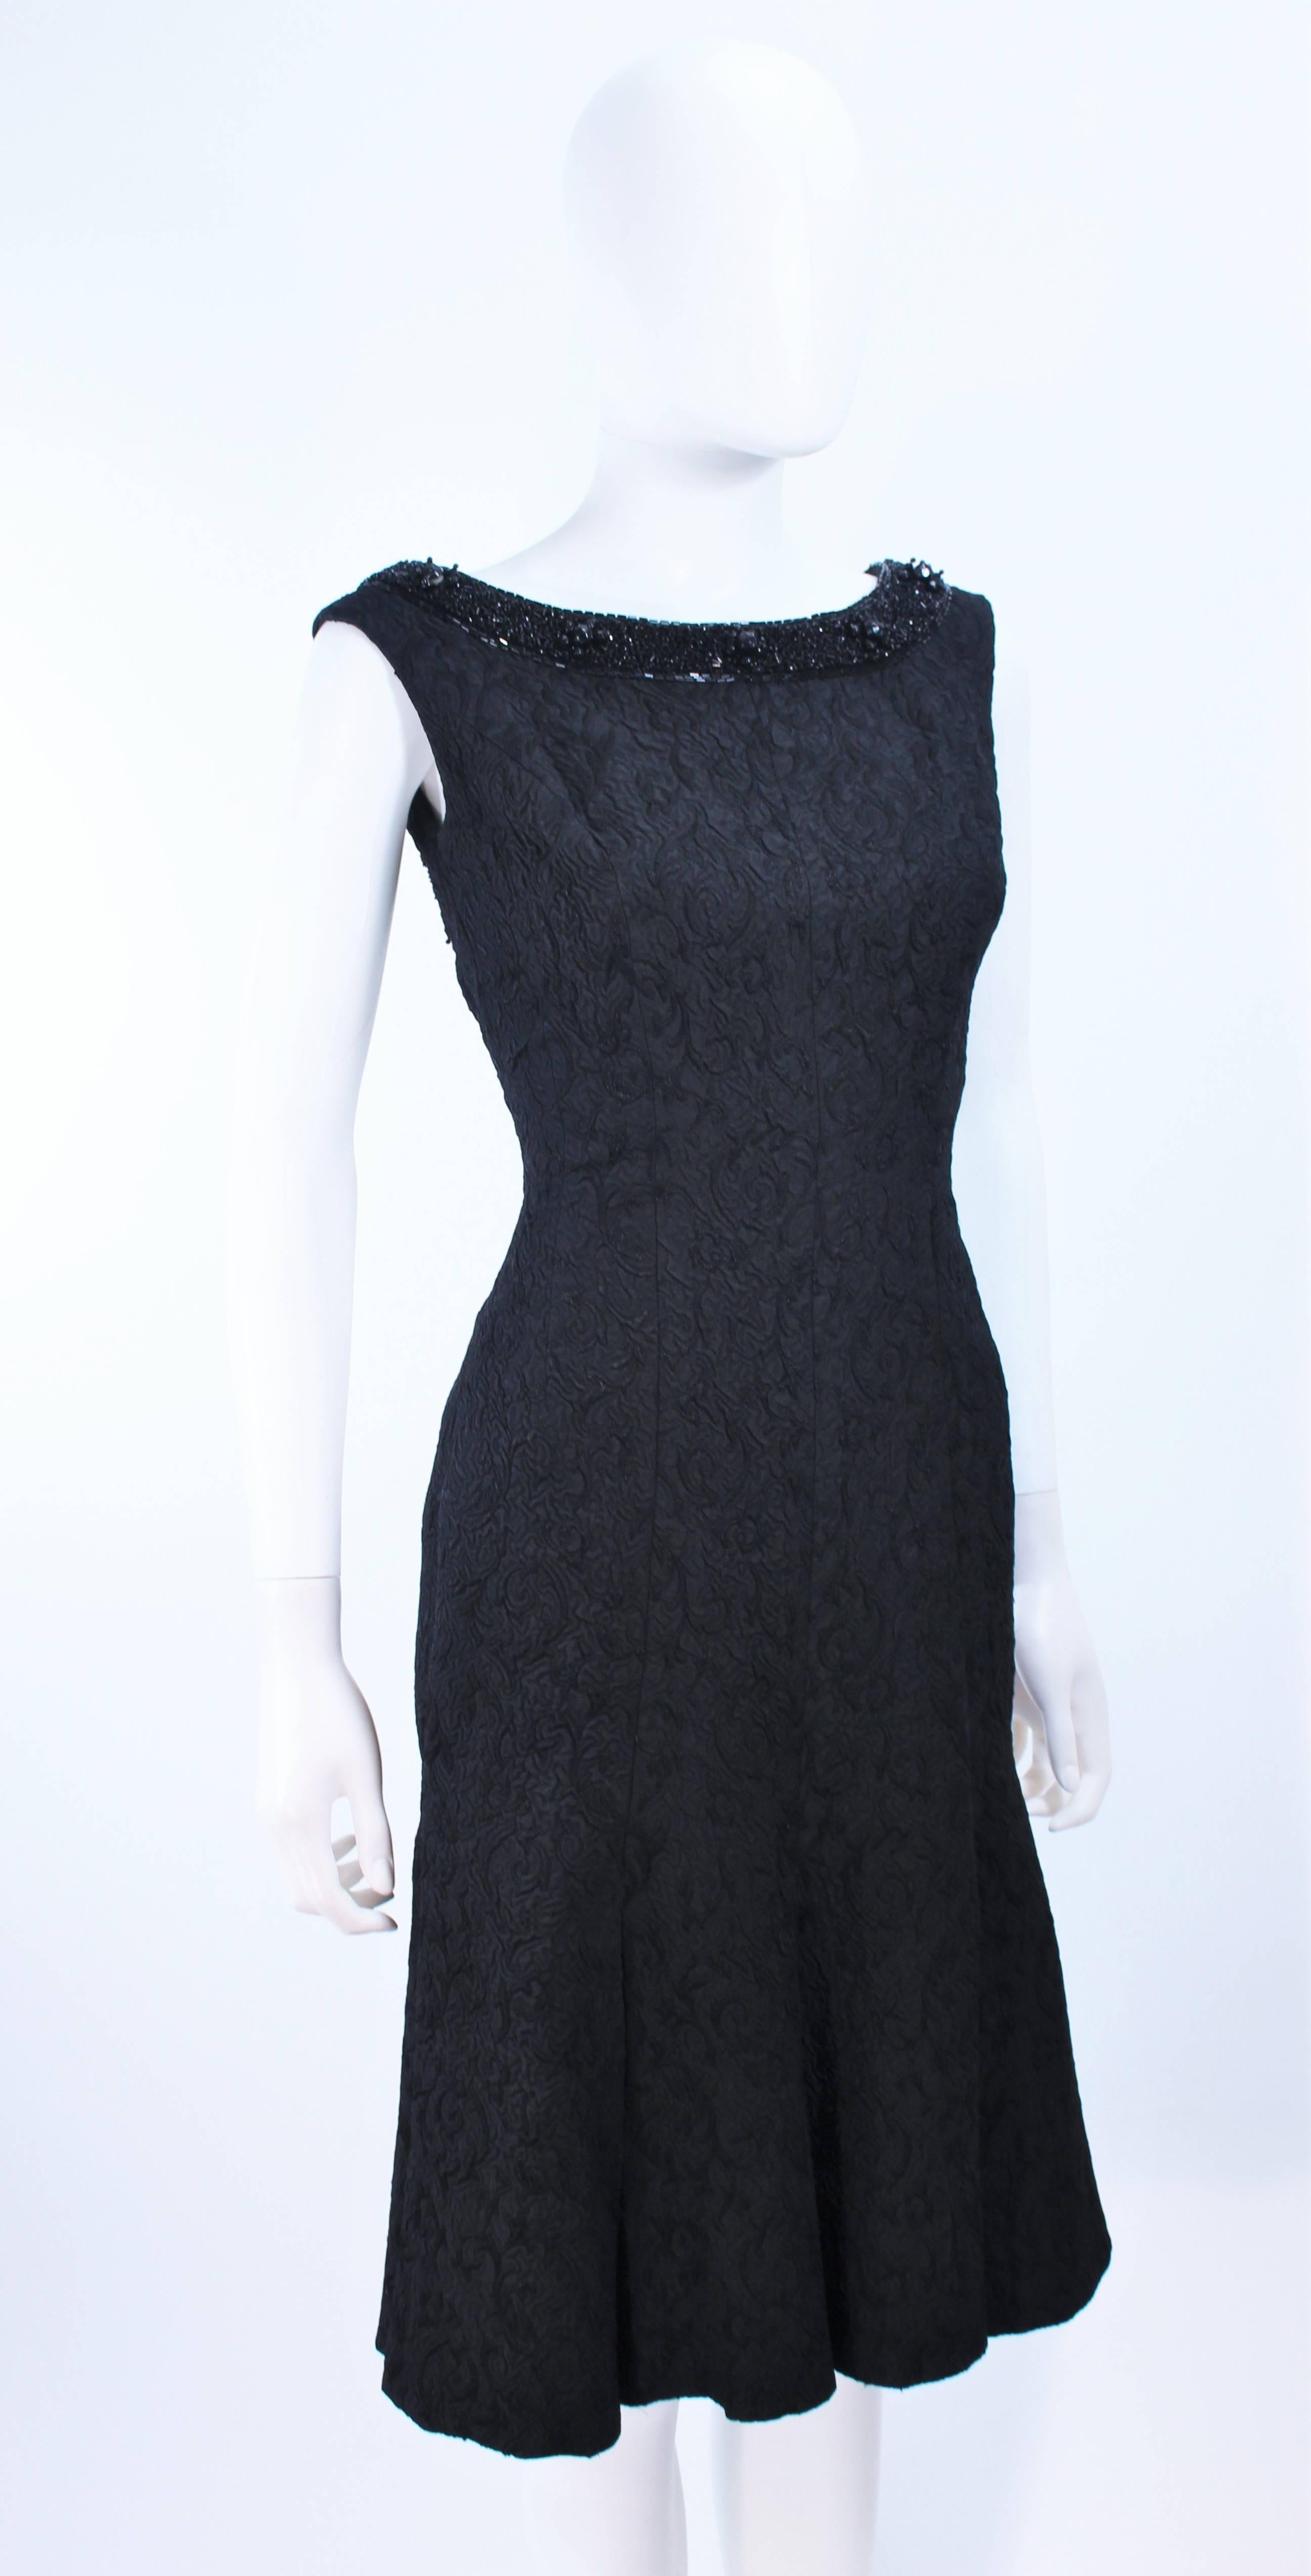 Women's Vintage 1960's Black Brocade Cocktail Dress with Beaded Neckline Size 2 For Sale